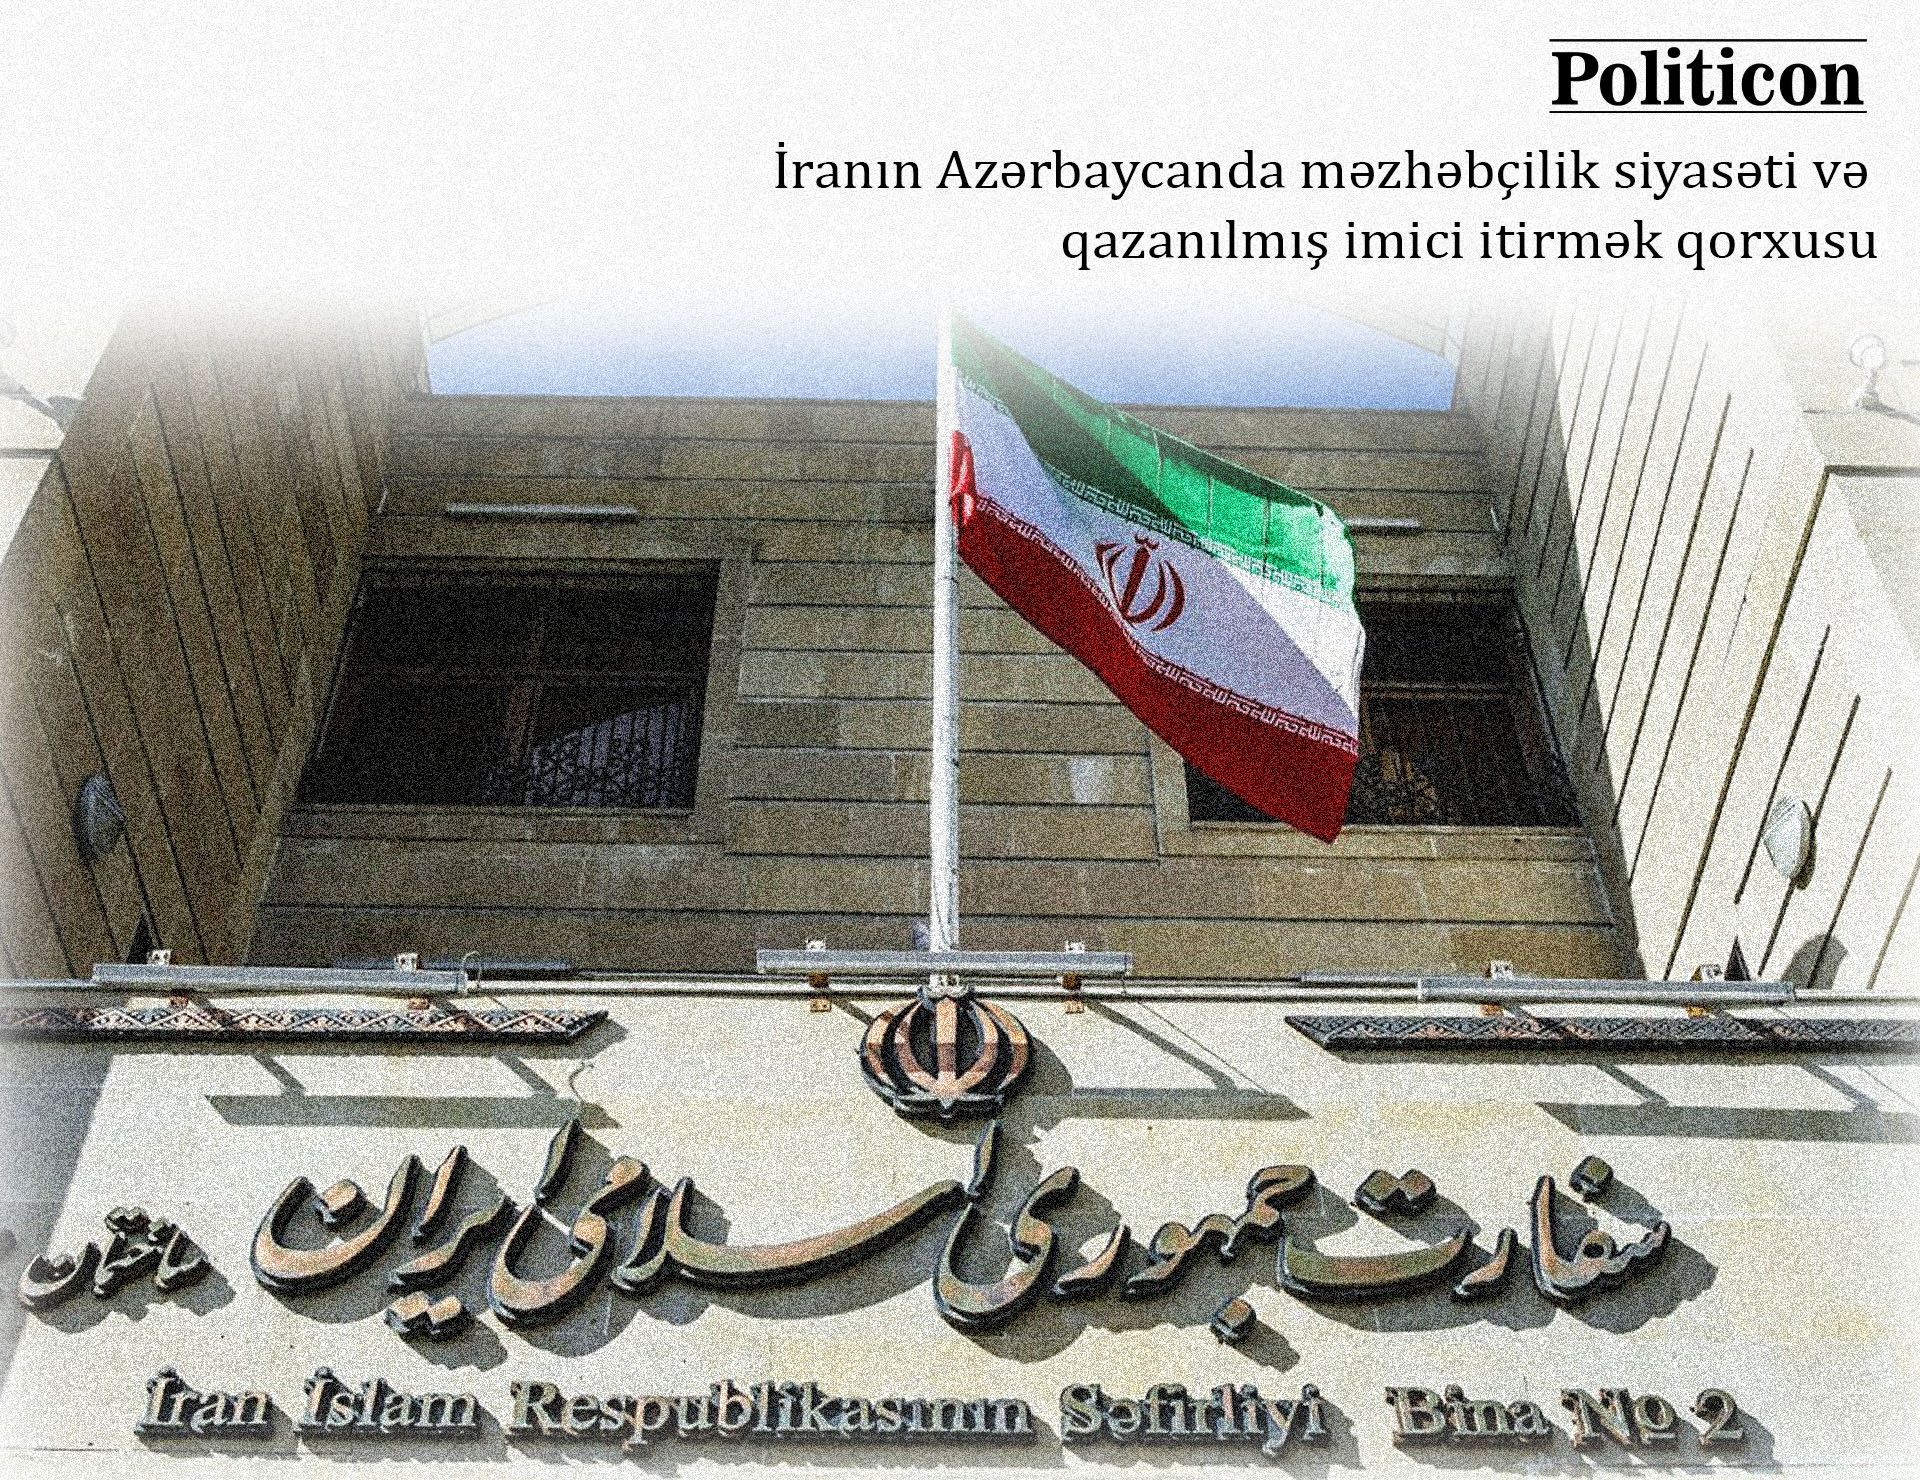 Iran's sectarian policy and fear of losing its image in Azerbaijan